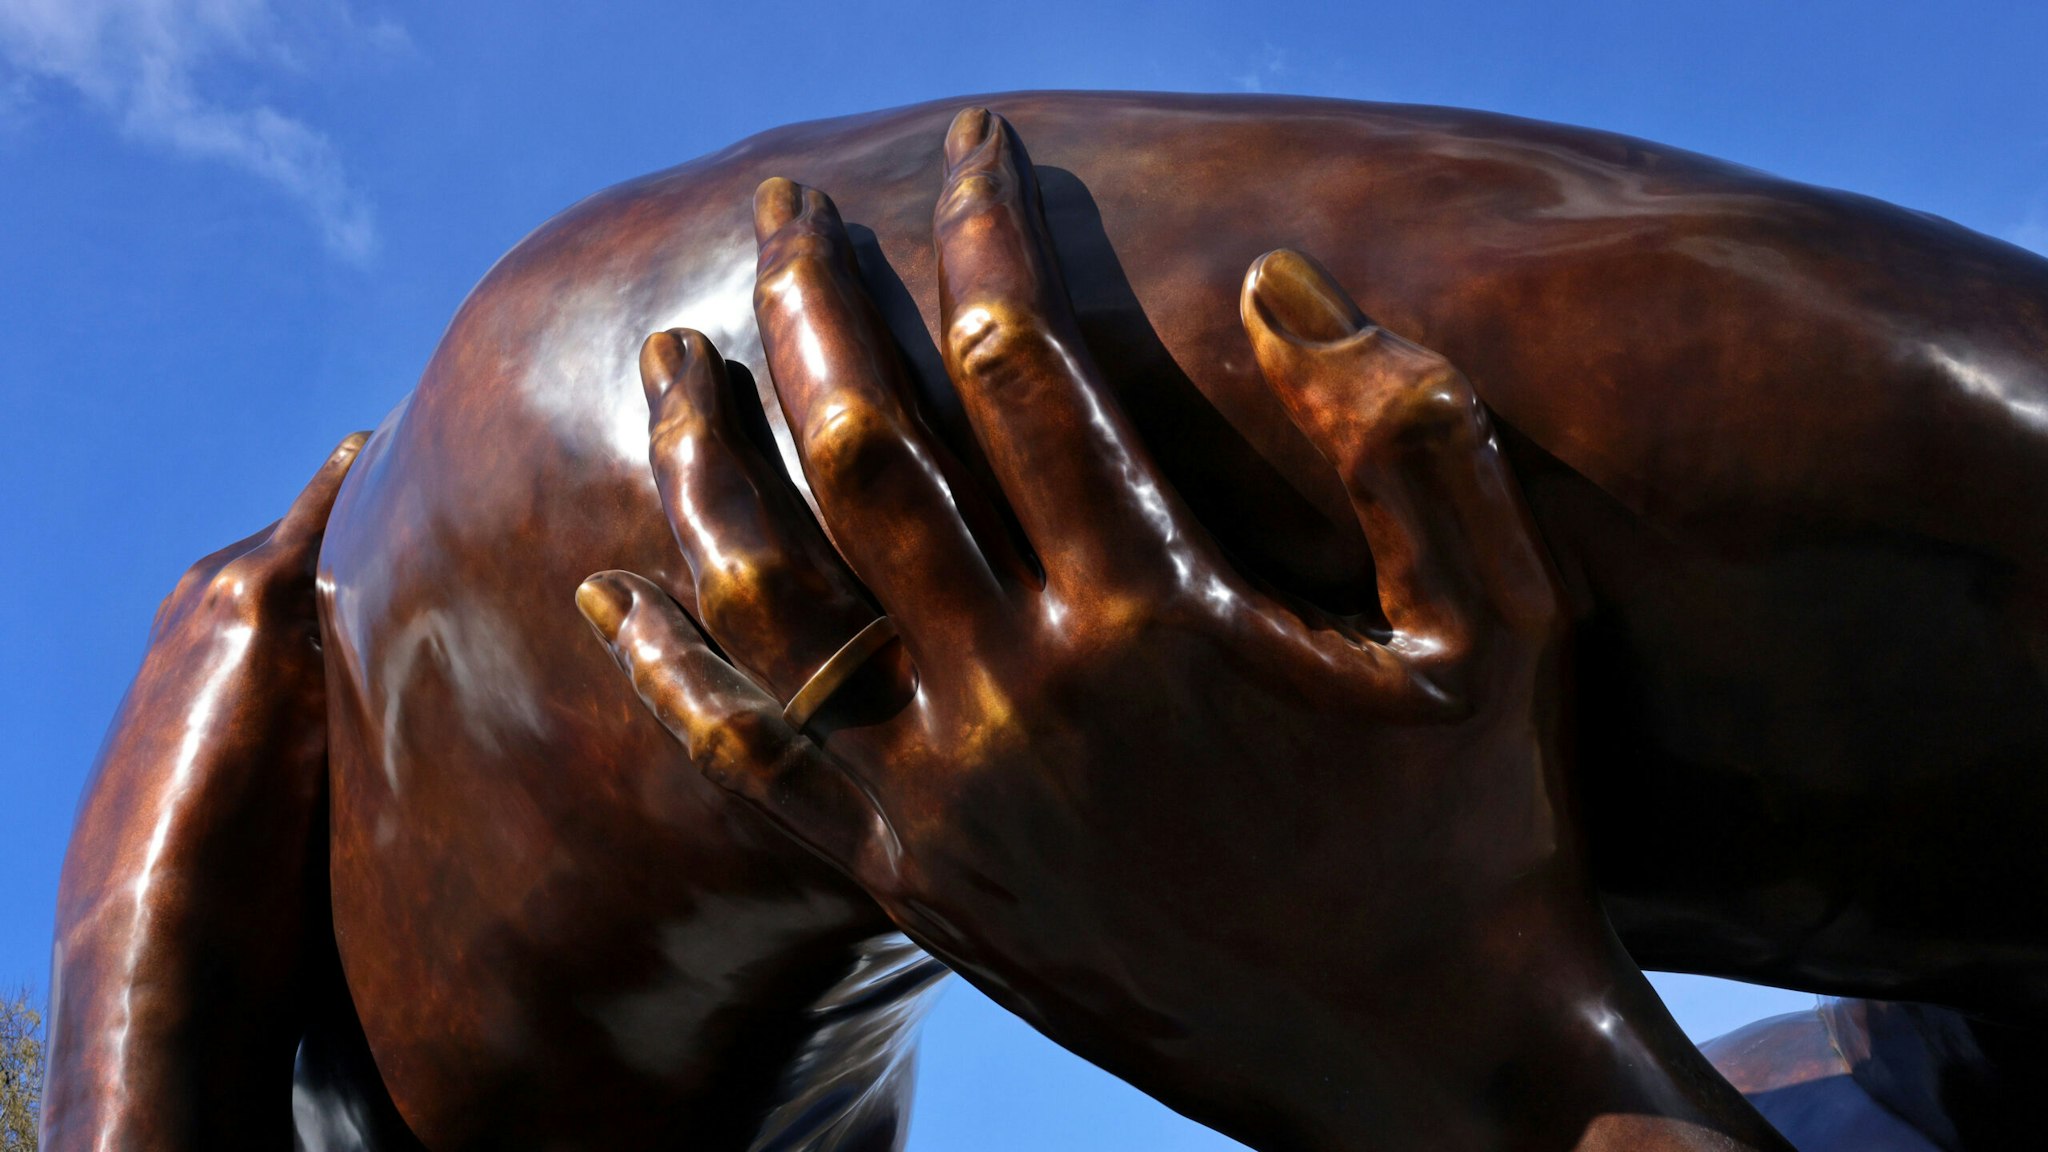 Boston, MA - January 10: Embrace, the Dr. Martin Luther King Jr. memorial sculpture at Boston Common.